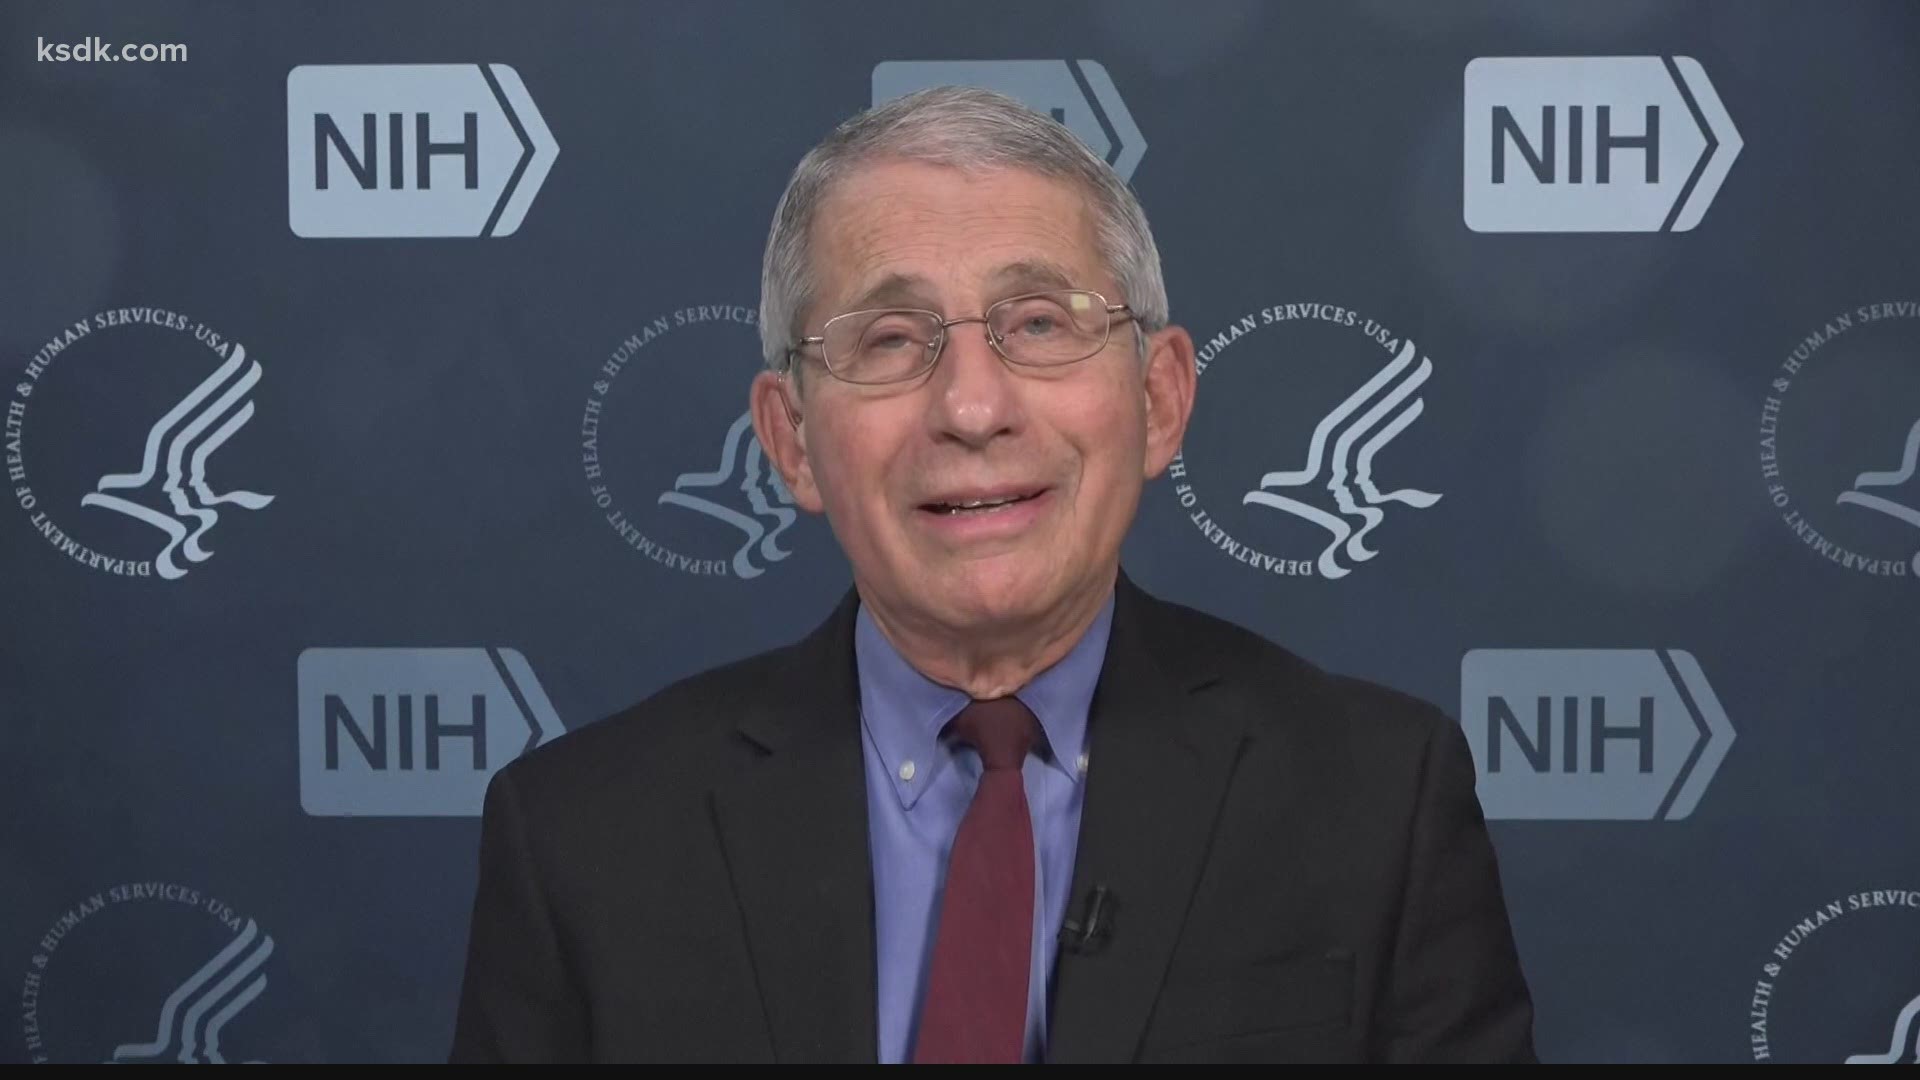 "As much fun as it is to get together in a big Super Bowl party, now is not the time to do that," Fauci said